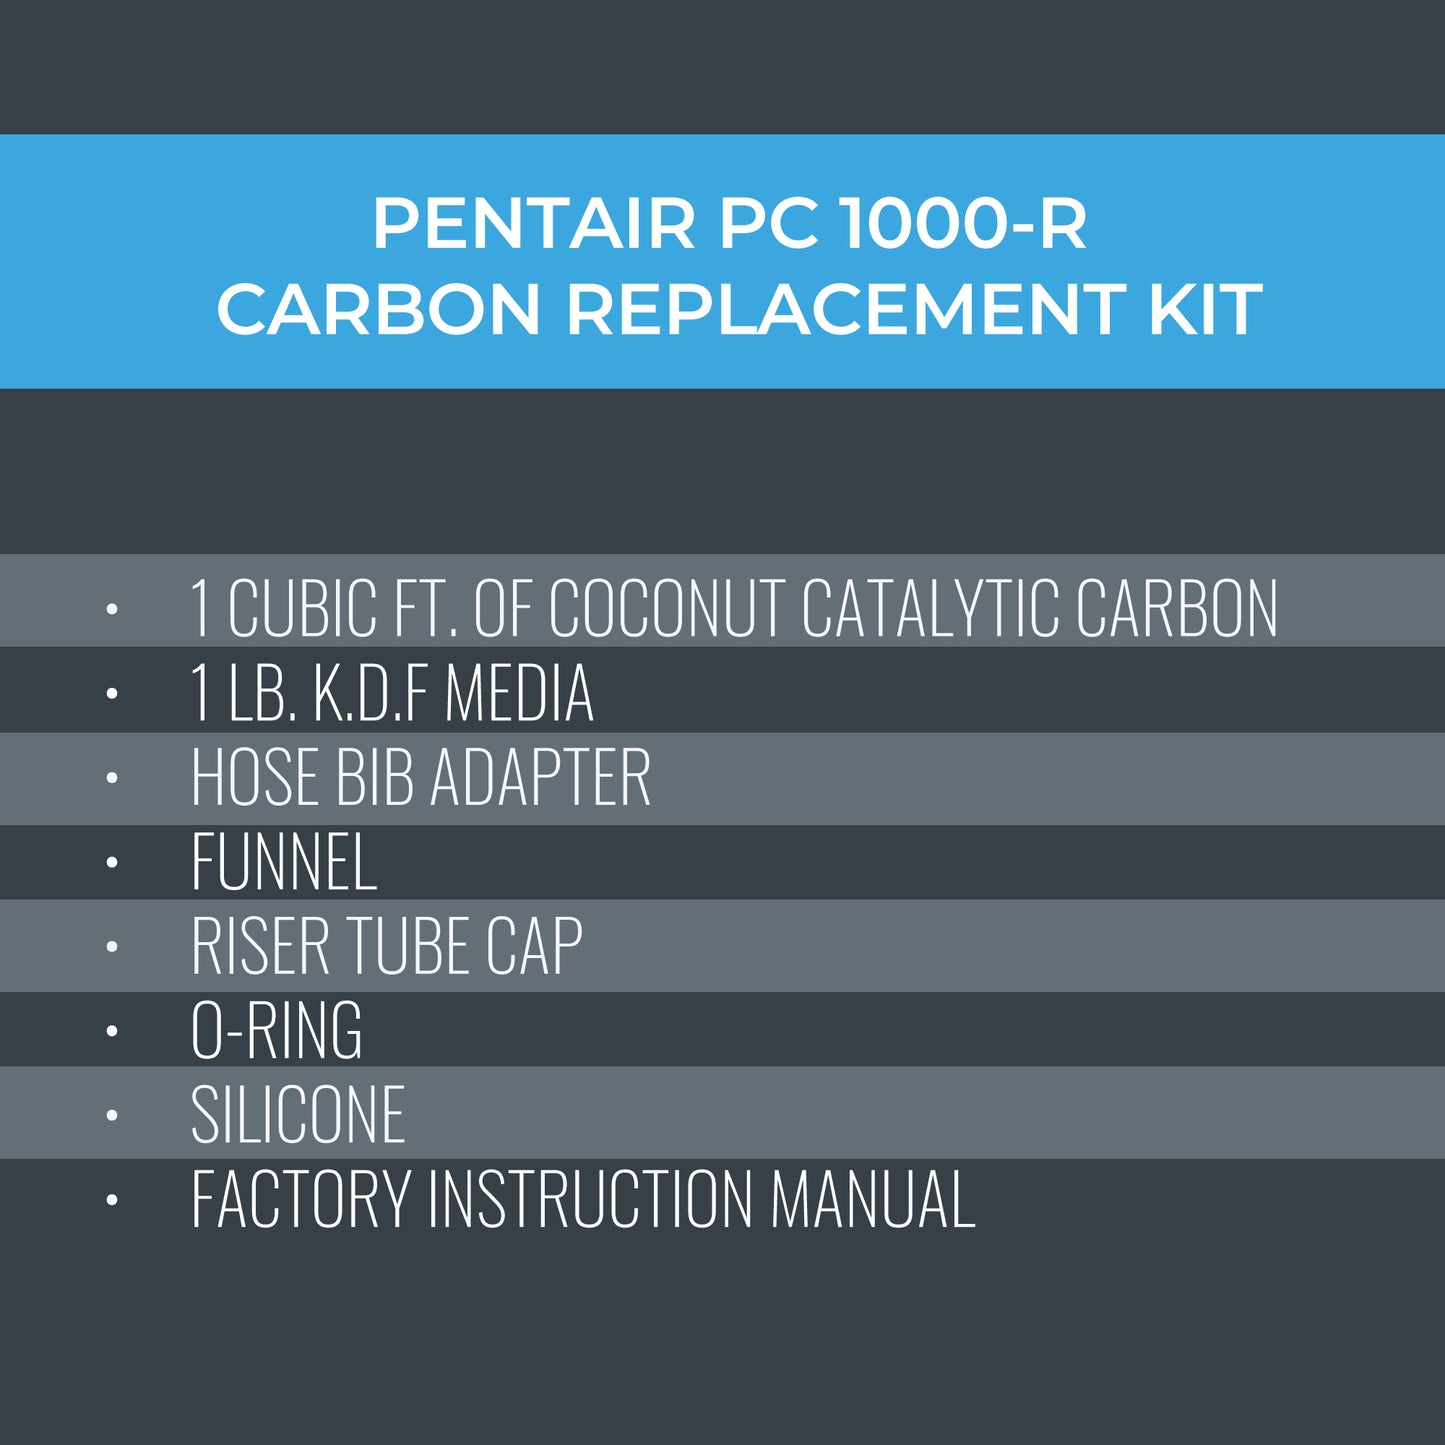 Whole House Water Filter System Carbon Replacement Media | PC1000-R For Pentair Pelican PC1000 Tank